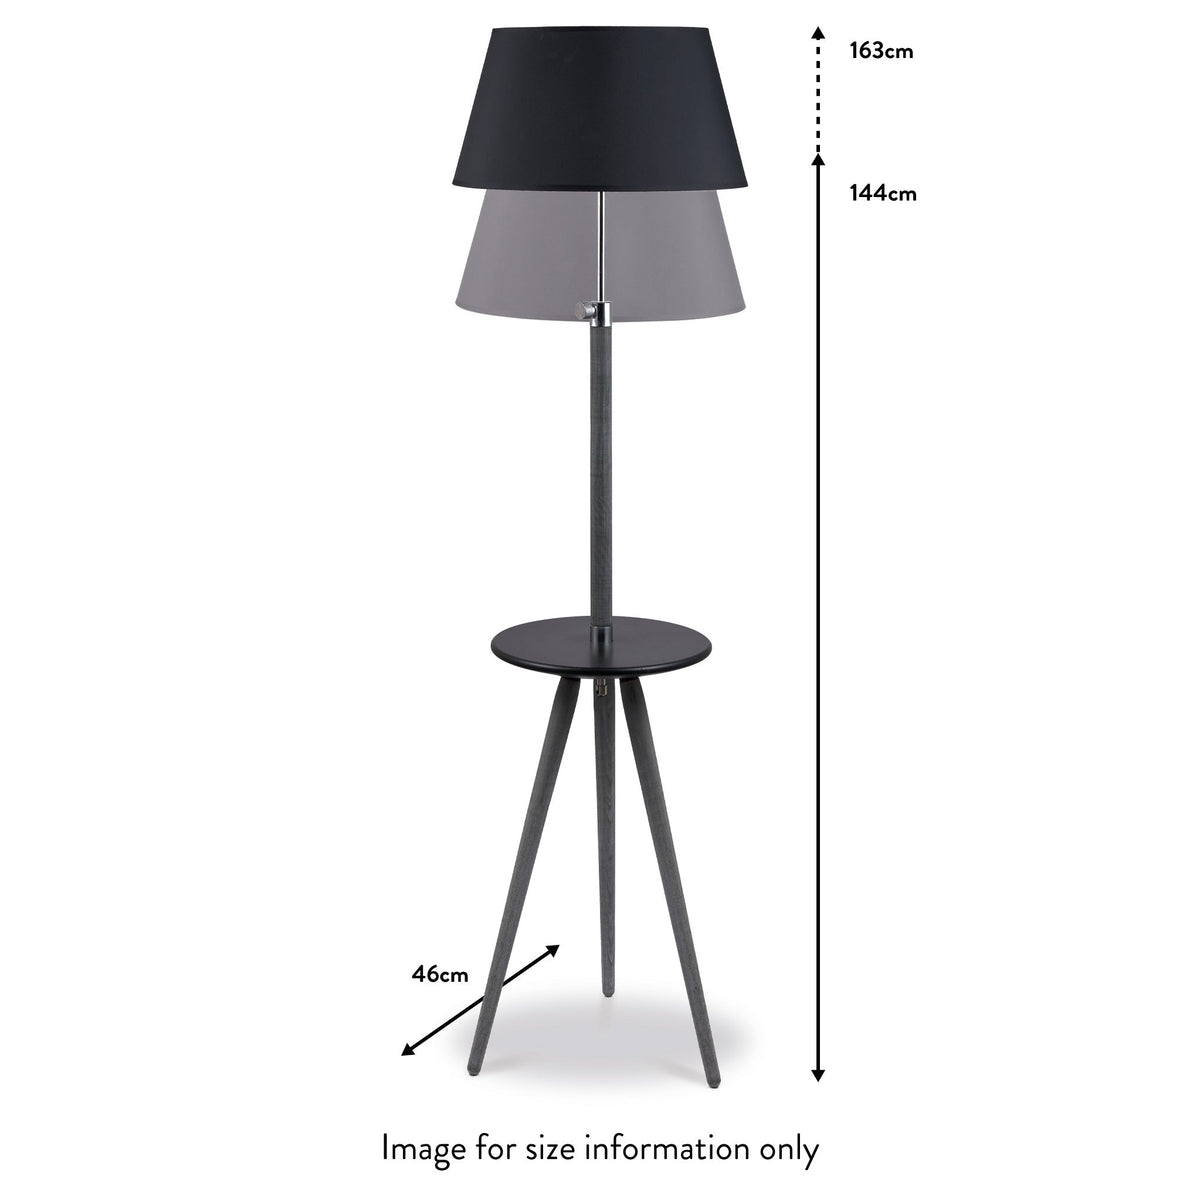 Malmo Grey Wood with Black Table Floor Lamp dimensions